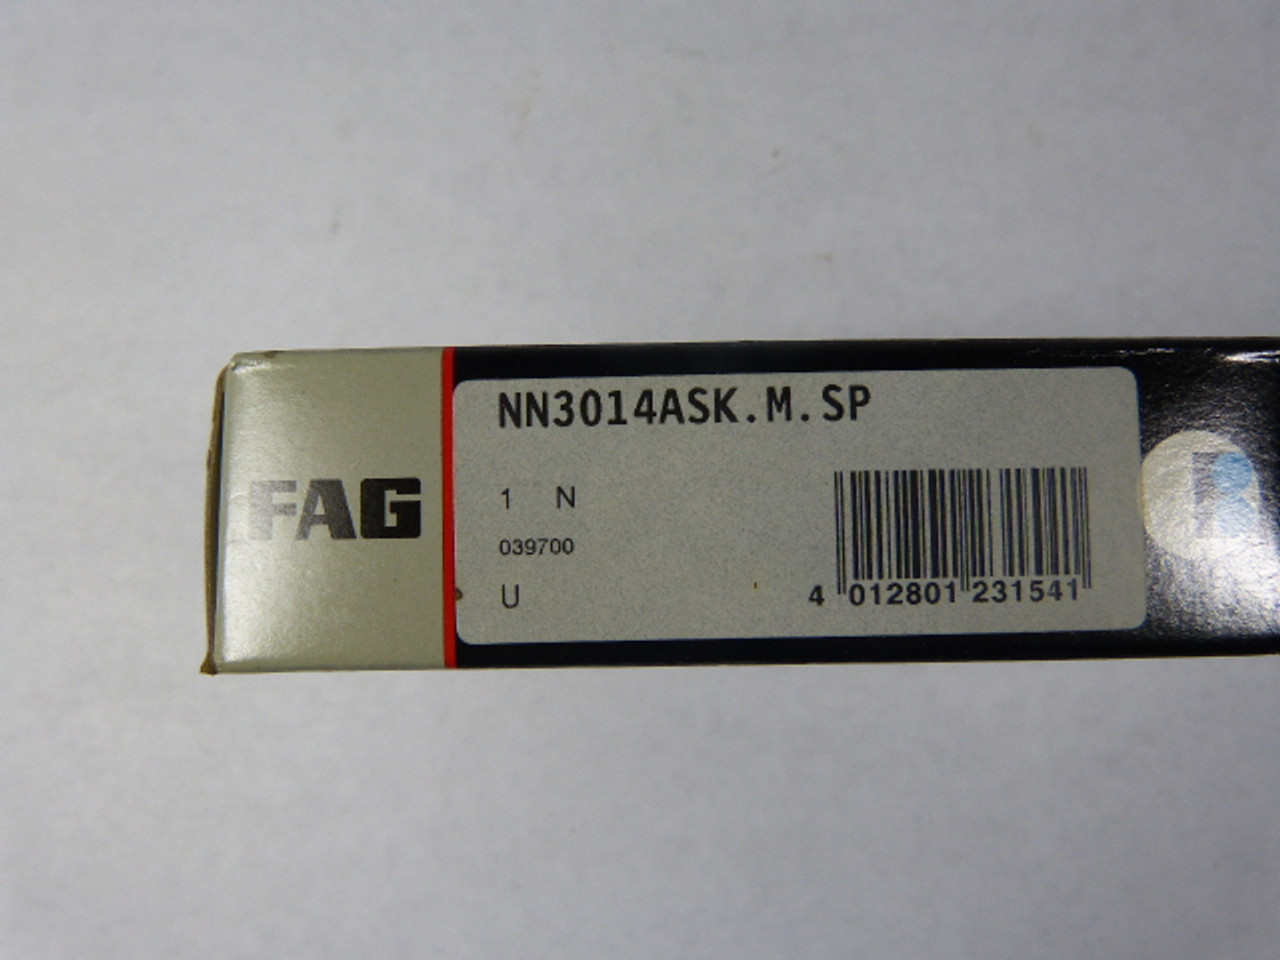 Fag NN3014ASK.M.SP Cylindrical Roller Bearing 70x110x30mm ! NEW !